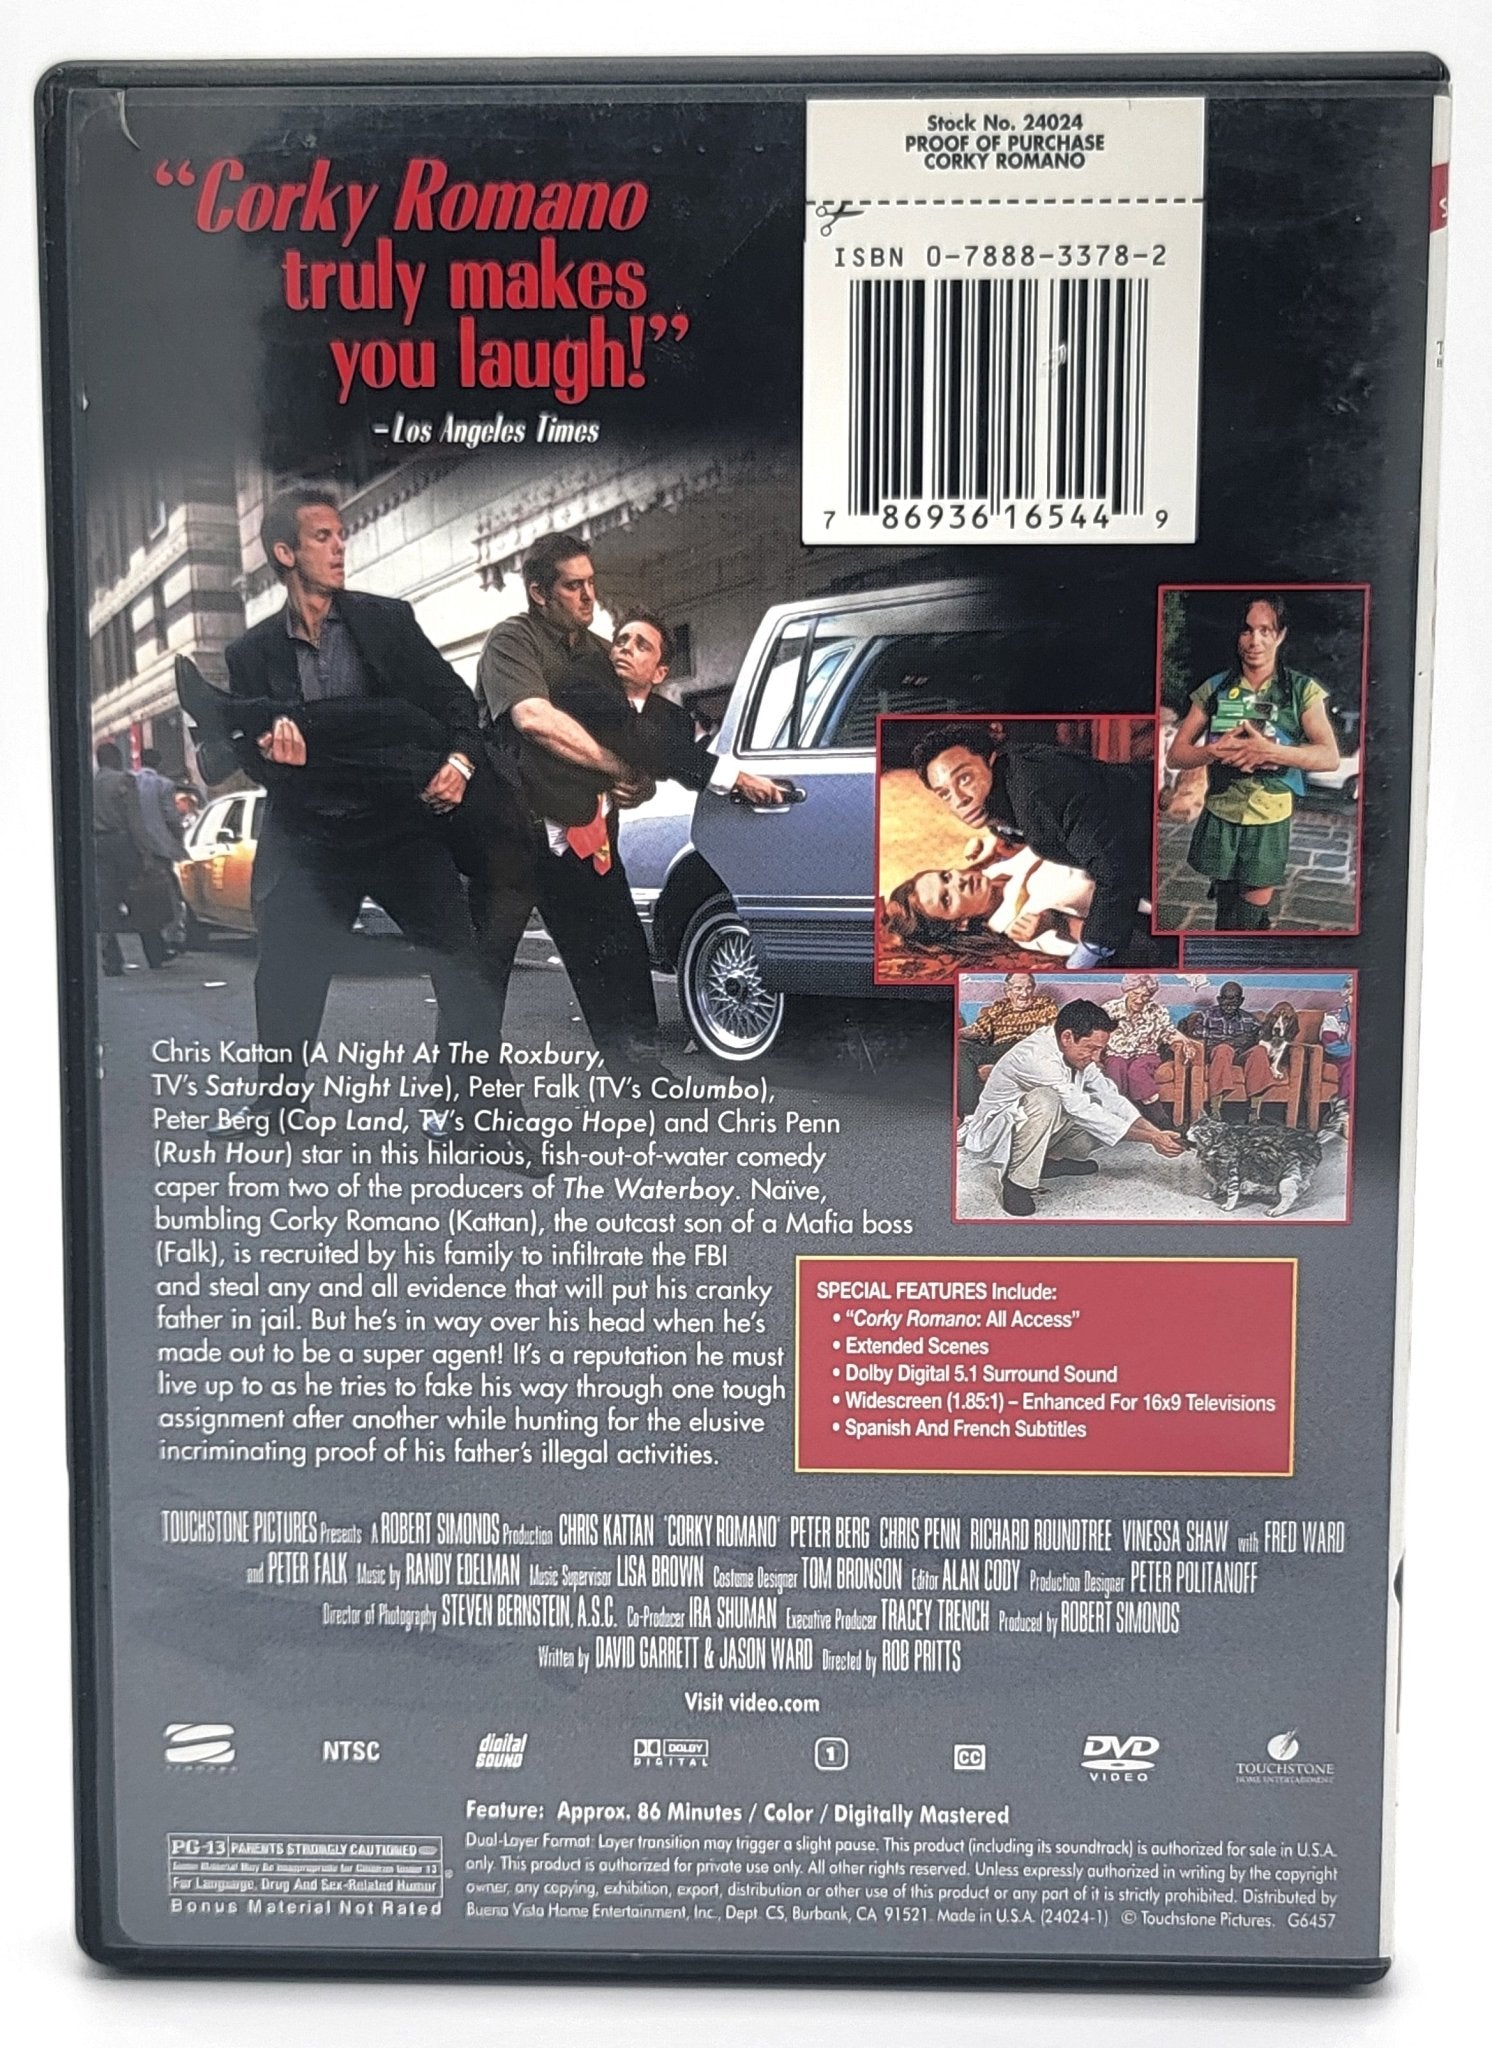 TOUCHSTONE PICTURES - Corky Romano | DVD | Widescreen - DVD - Steady Bunny Shop